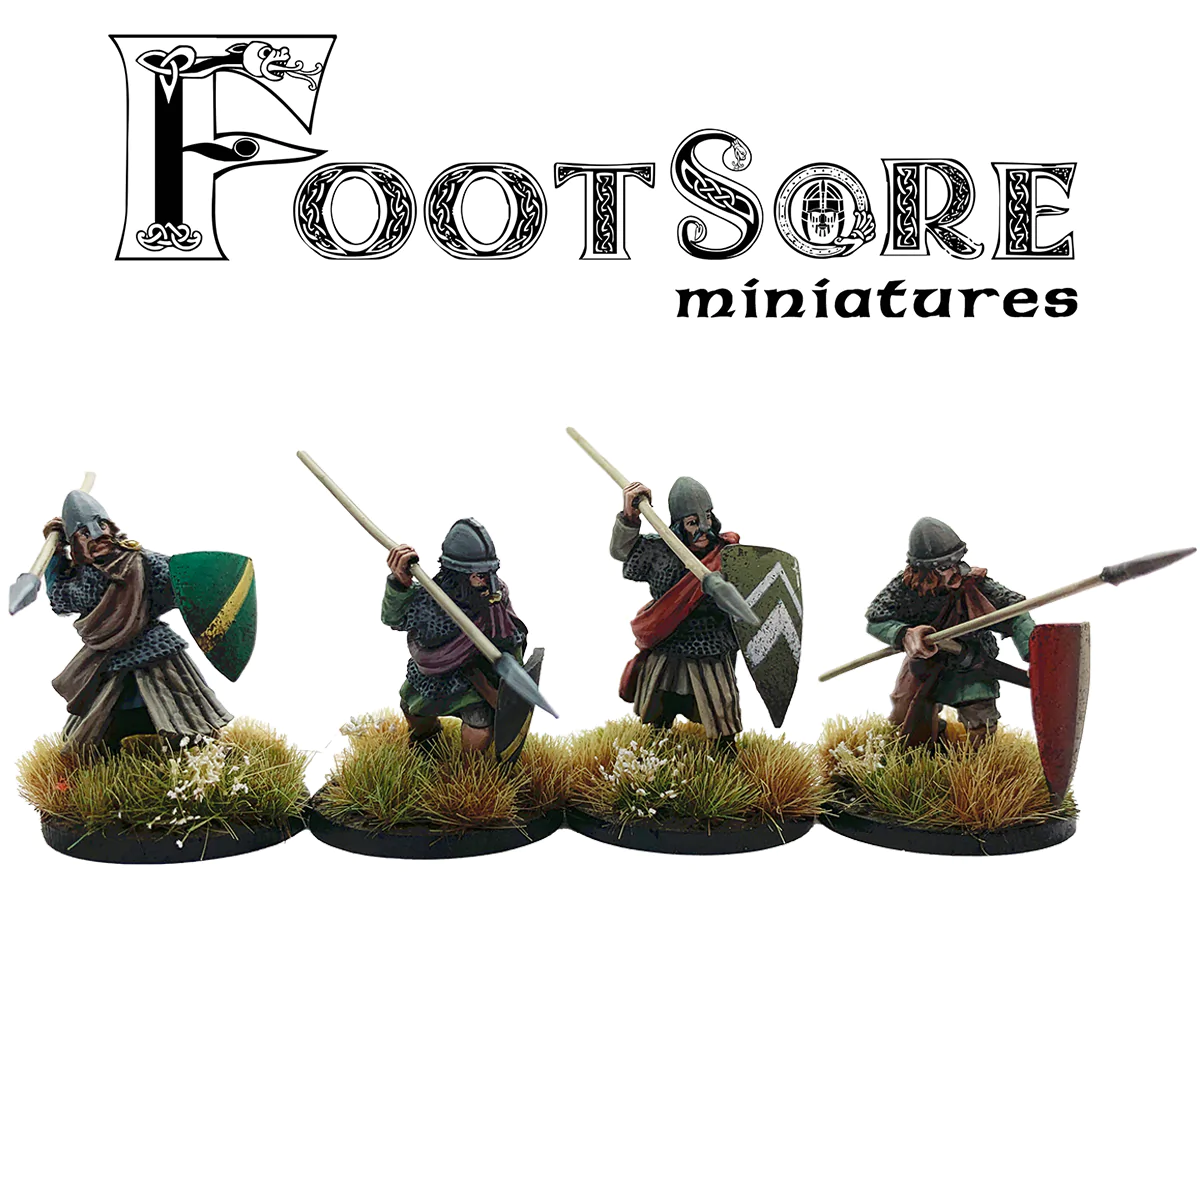 Footsore Miniatures WLS114MD Welsh Medieval Armoured Spearmen